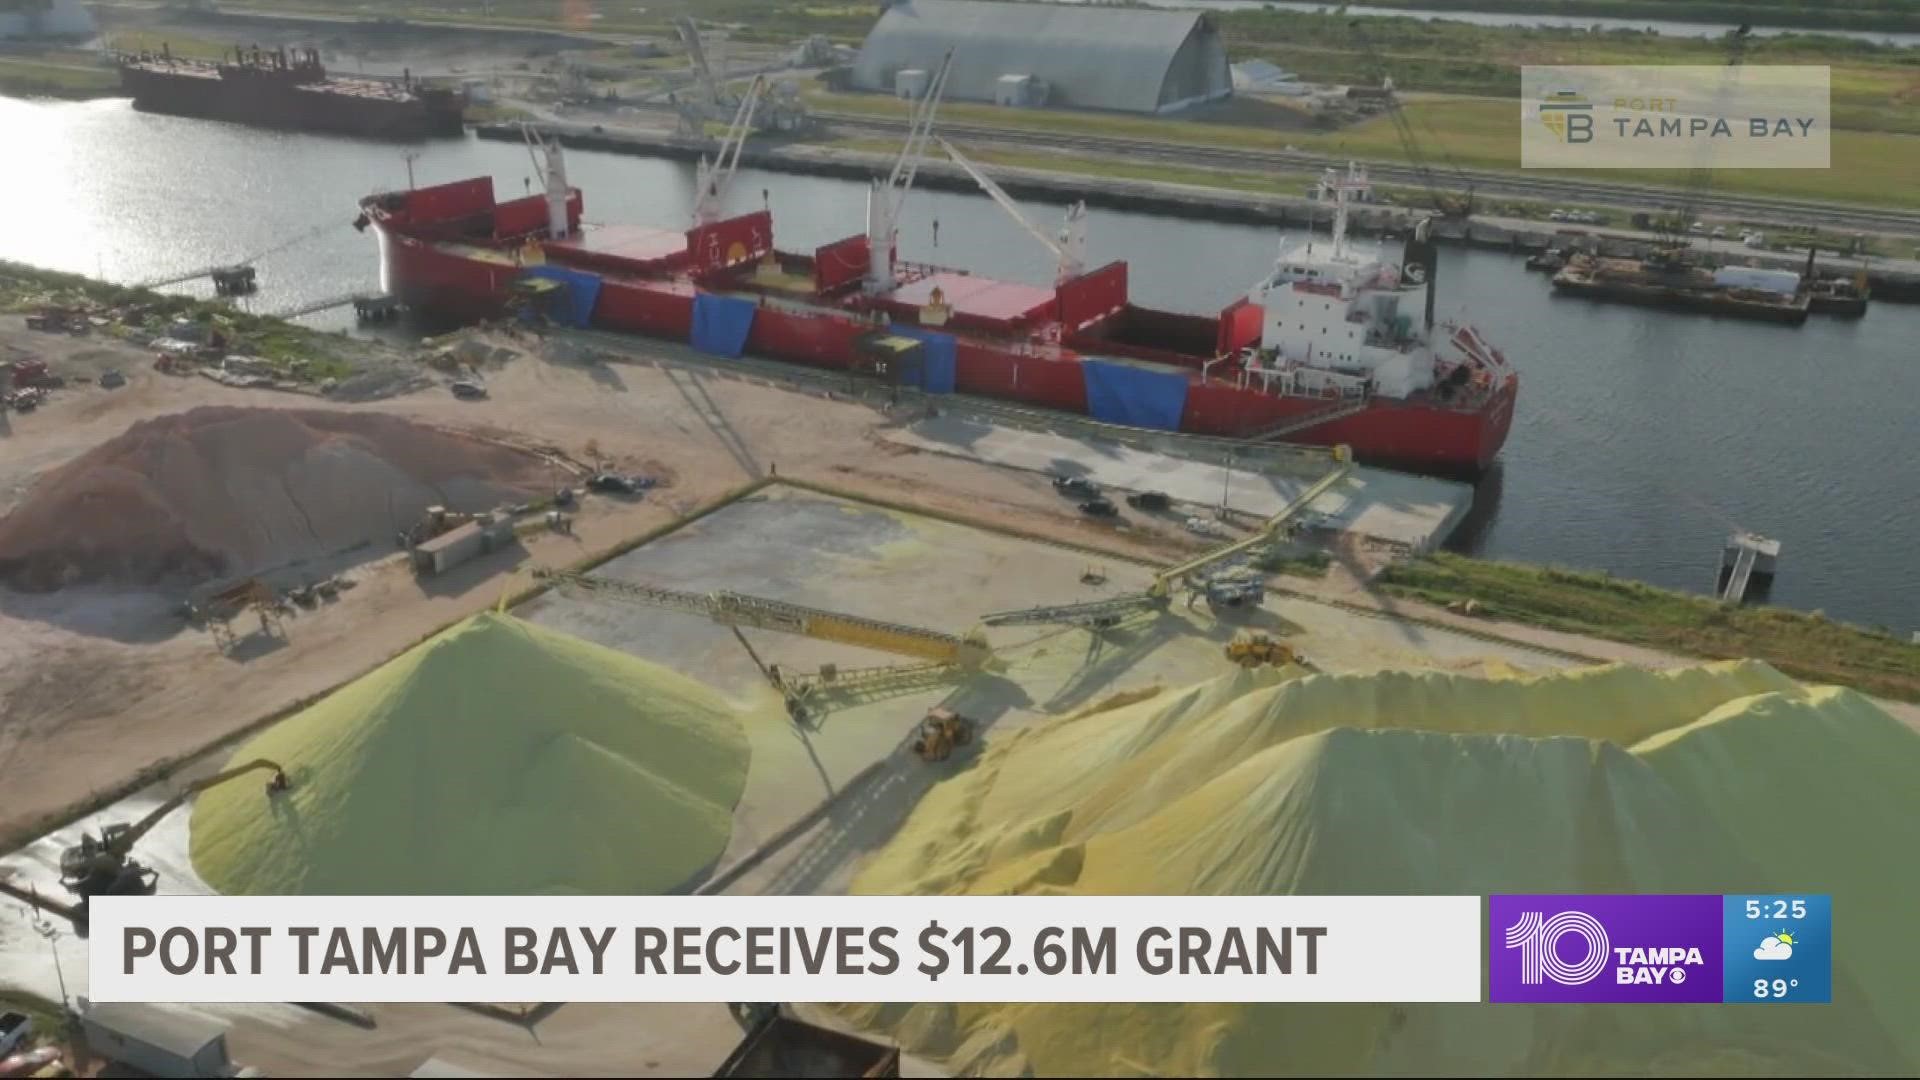 Earlier this month, the RAISE funding was announced in part to support the port's operations at the newly expanded Big Bend Channel.